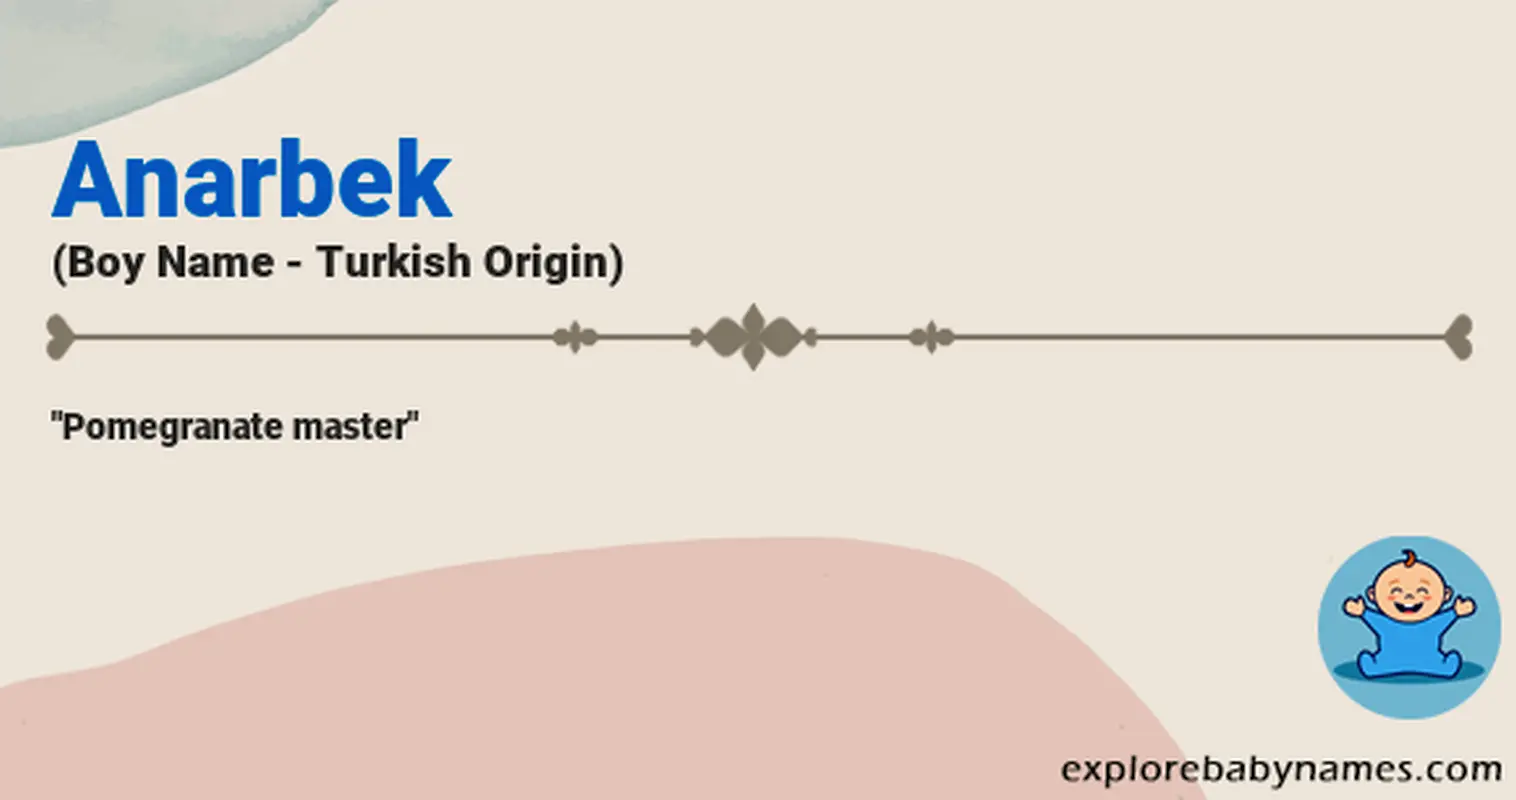 Meaning of Anarbek